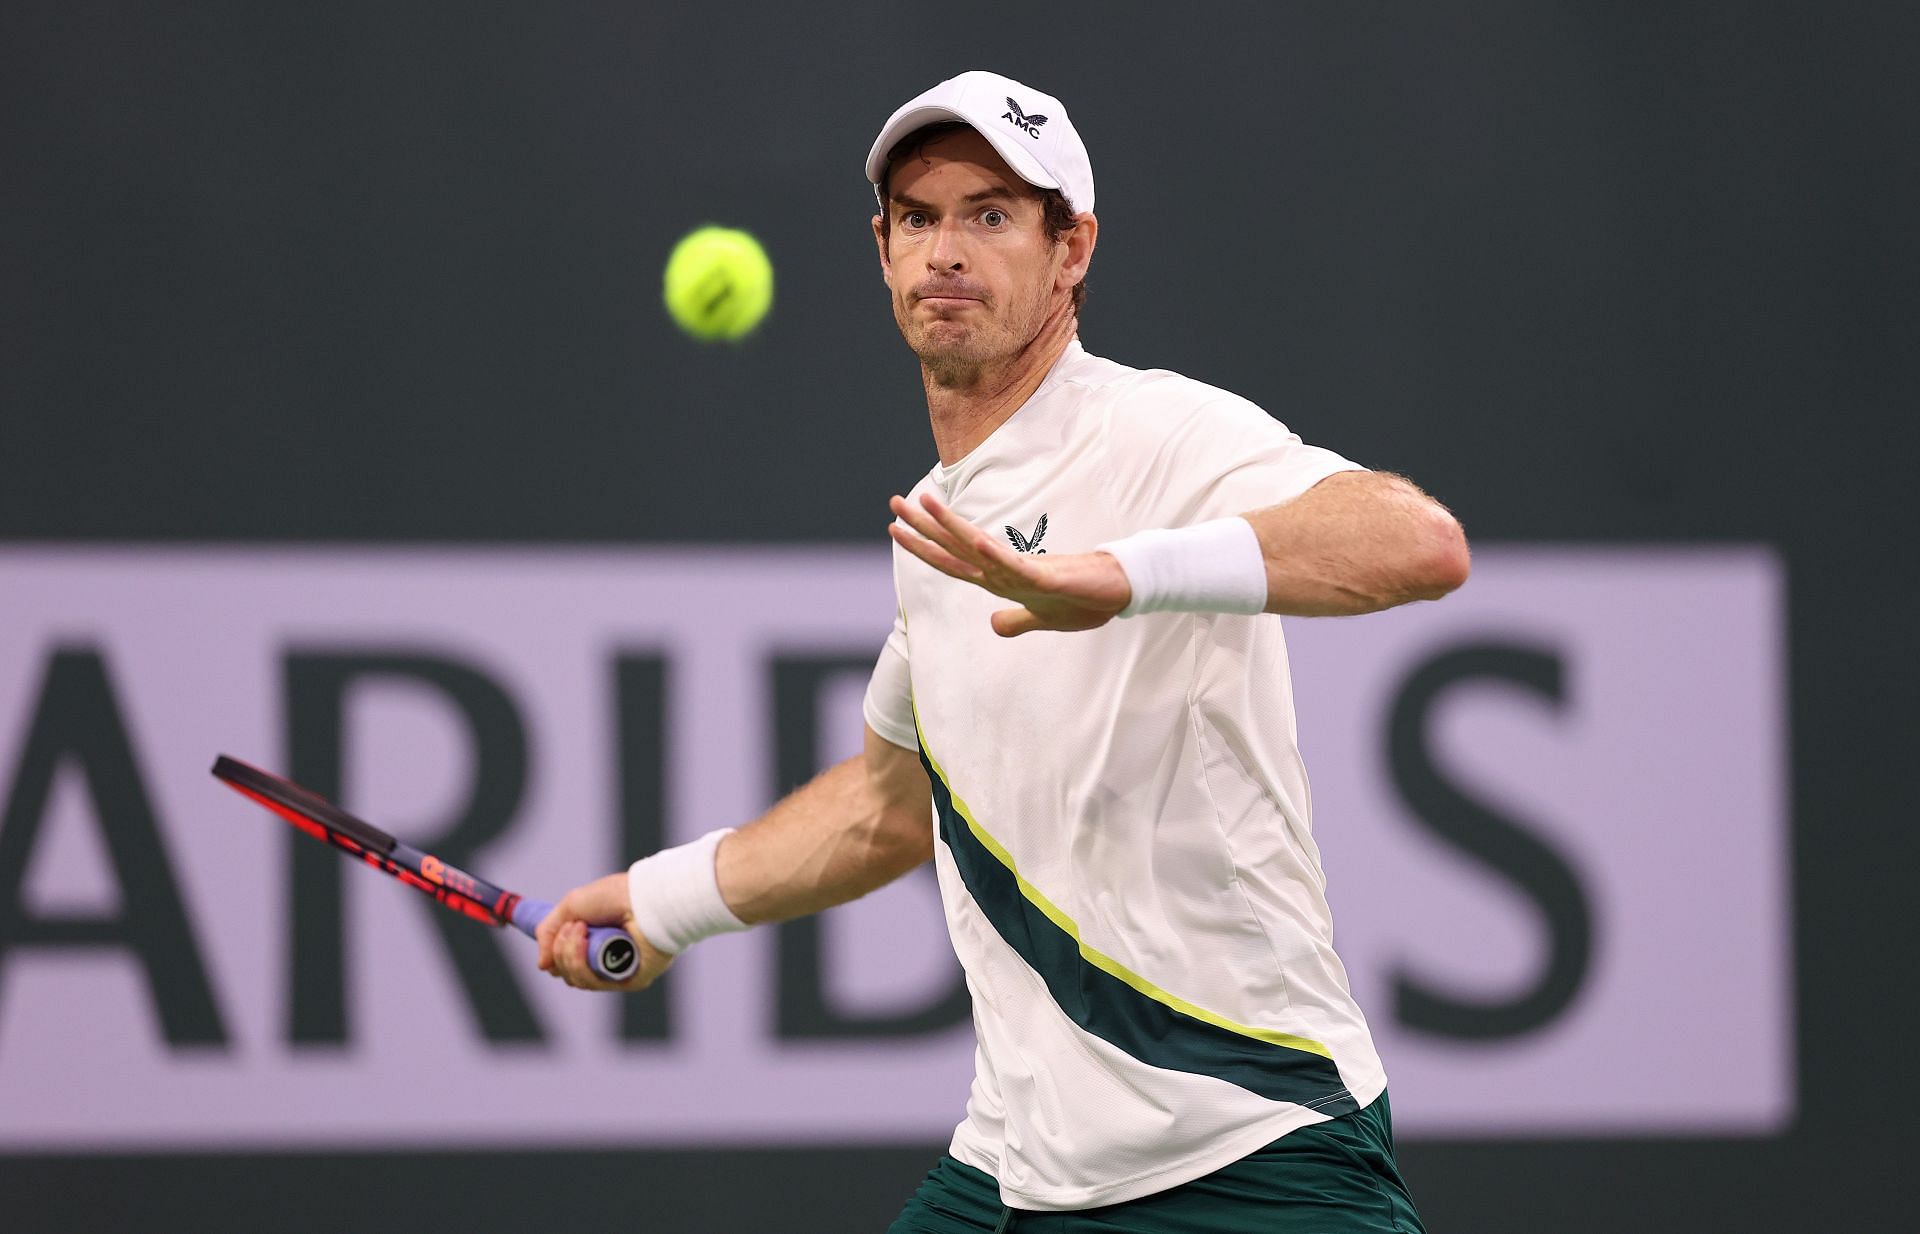 Andy Murray at the BNP Paribas Open - Day 8